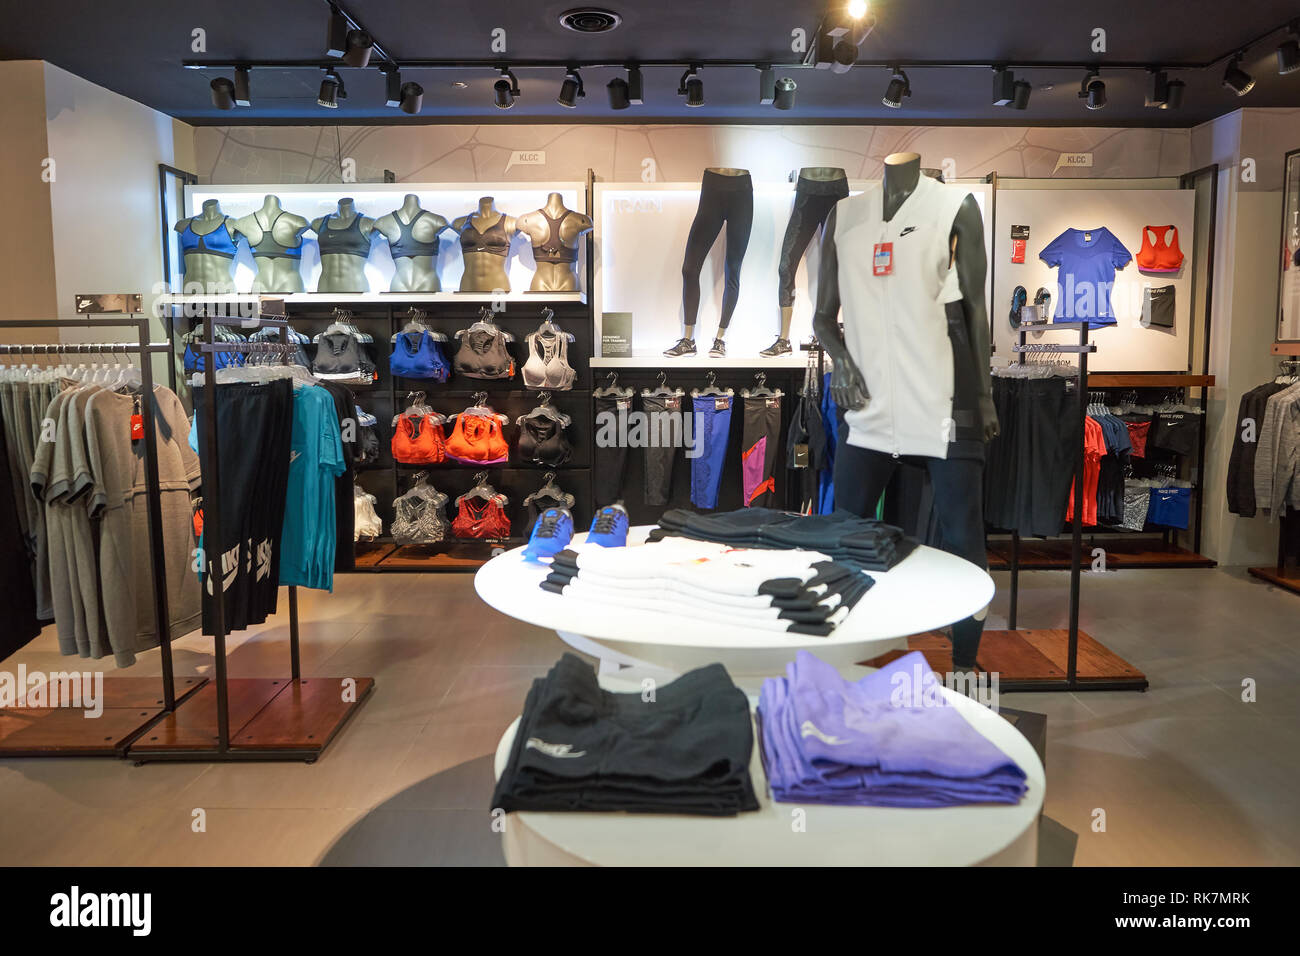 KUALA LUMPUR, MALAYSIA - MAY 09, 2016: Nike store in Suria KLCC. Suria KLCC  is a shopping mall is located in the Kuala Lumpur City Centre district. It  Stock Photo - Alamy